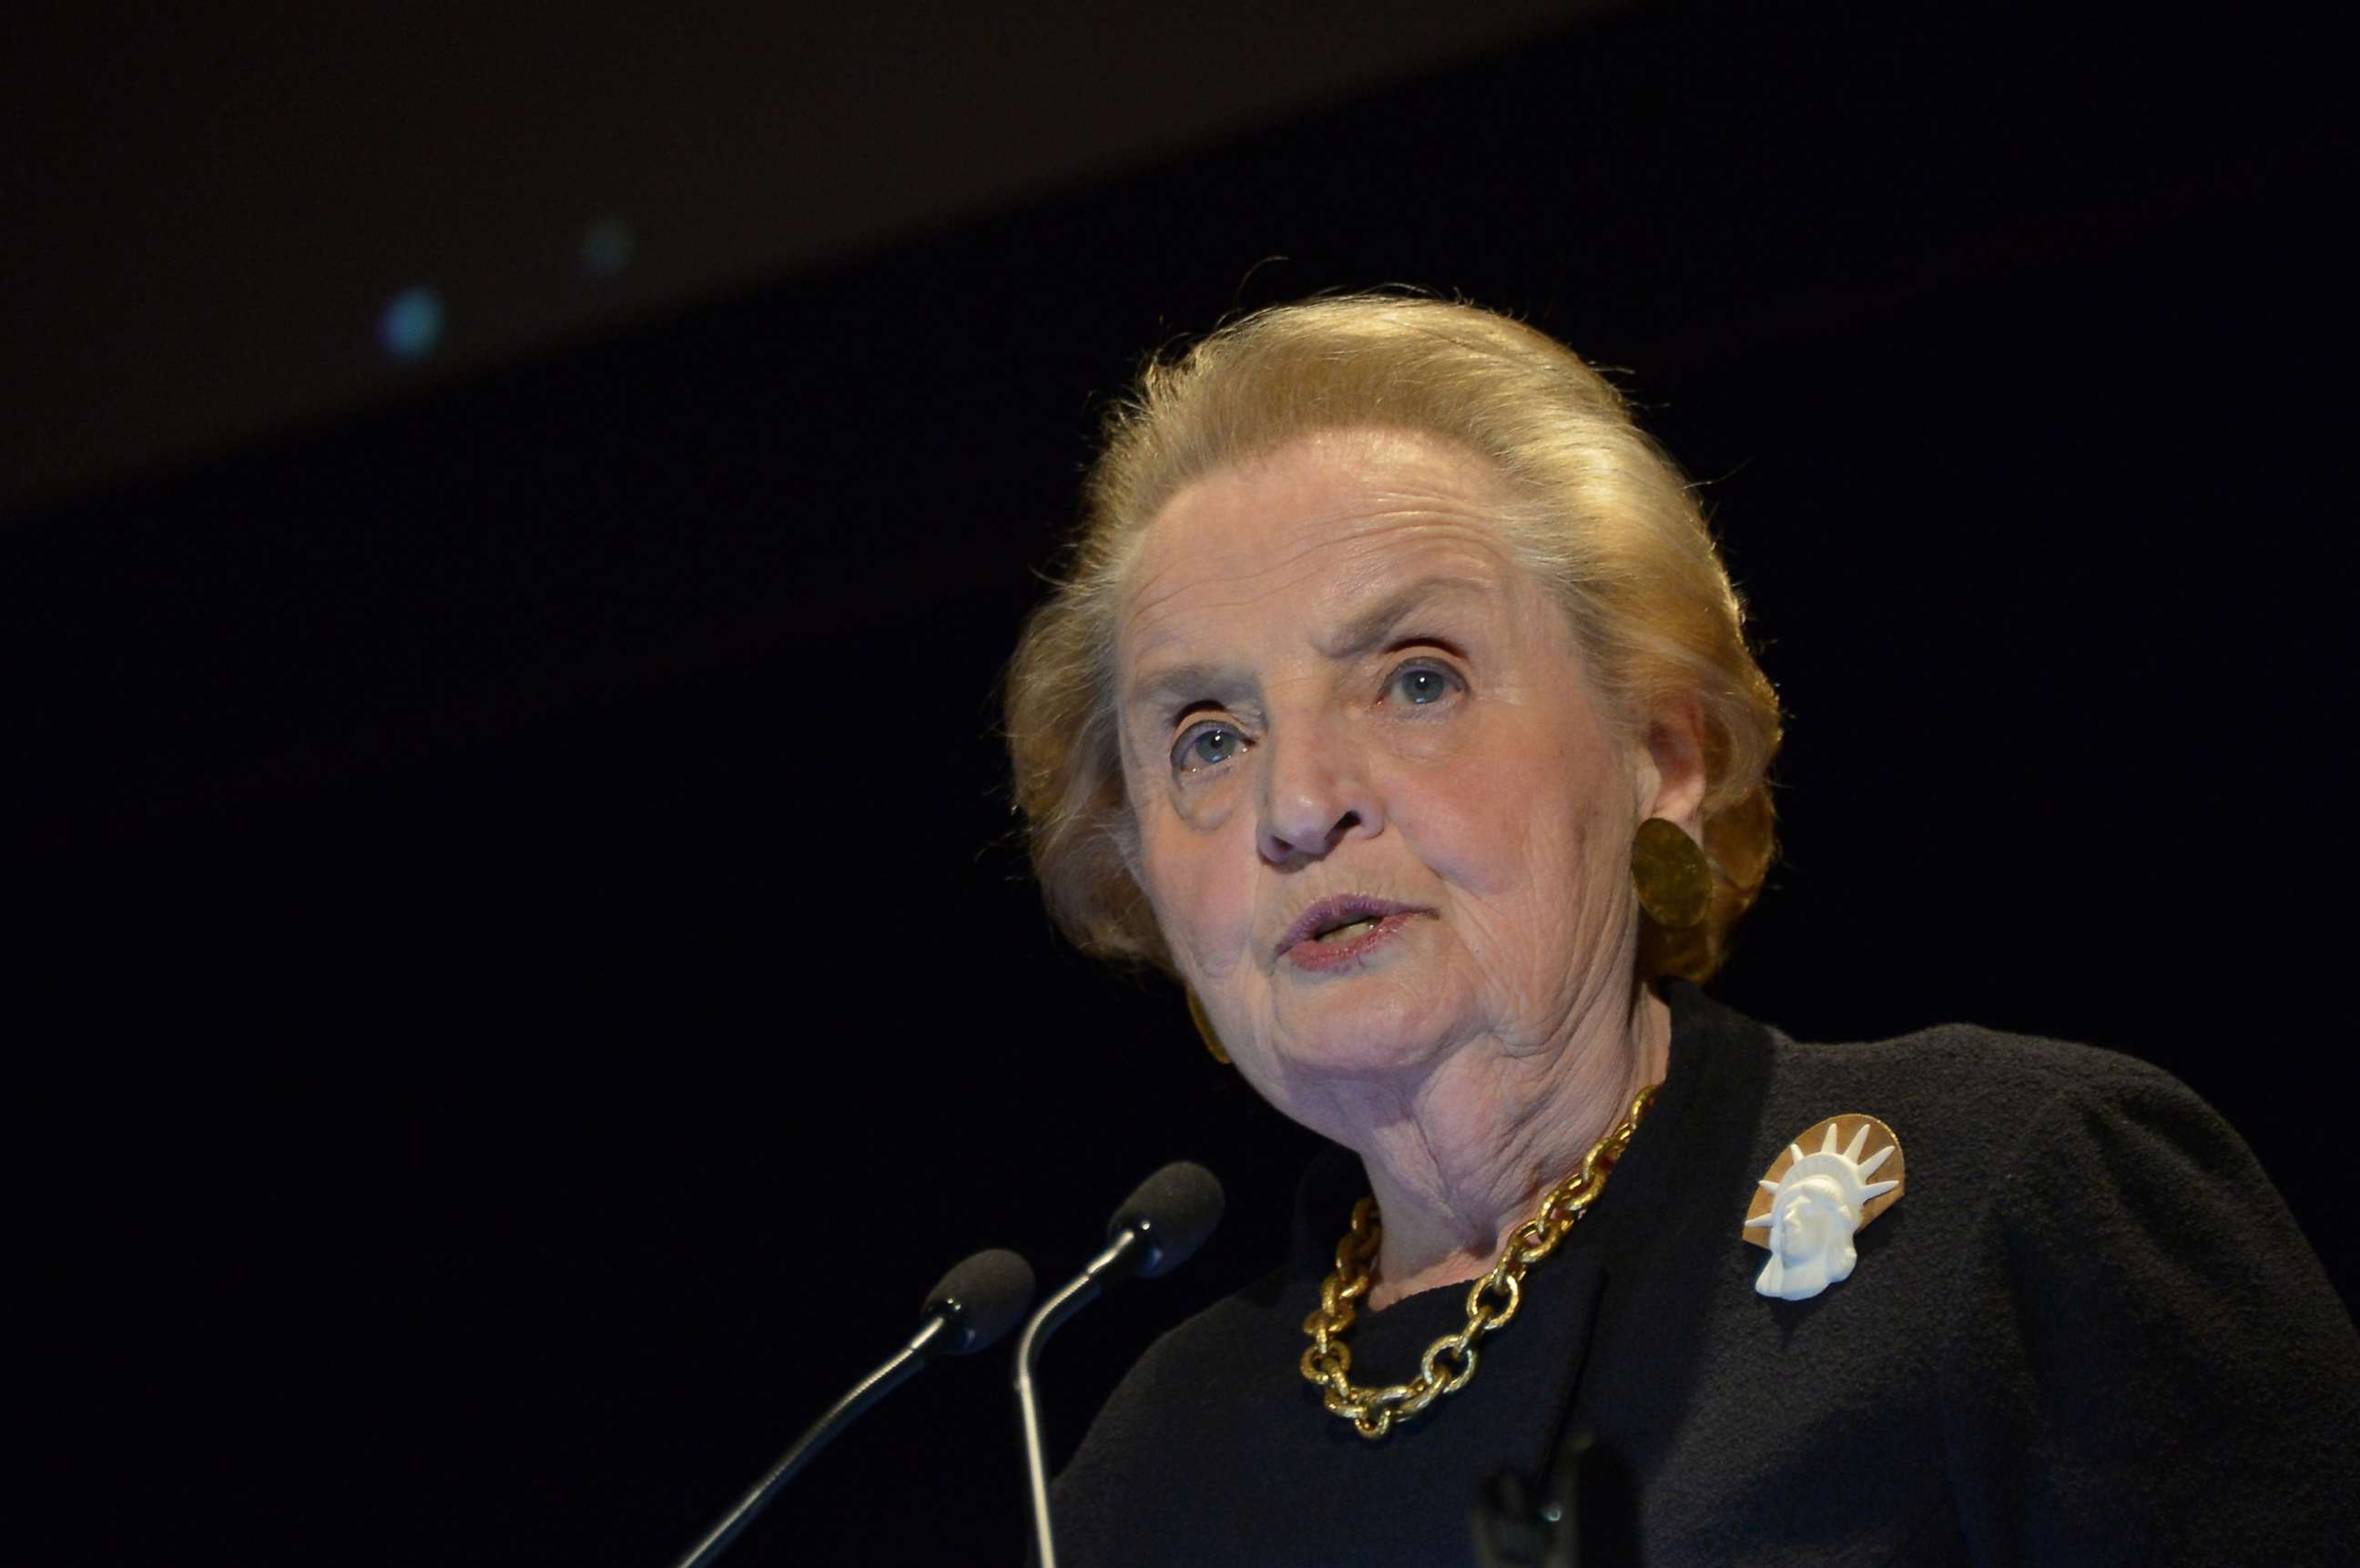 PHOTO: Former Secretary of State Madeleine Albright attends the Annual Freedom Award Benefit hosted by the International Rescue Committee in New York, Nov. 6, 2013.